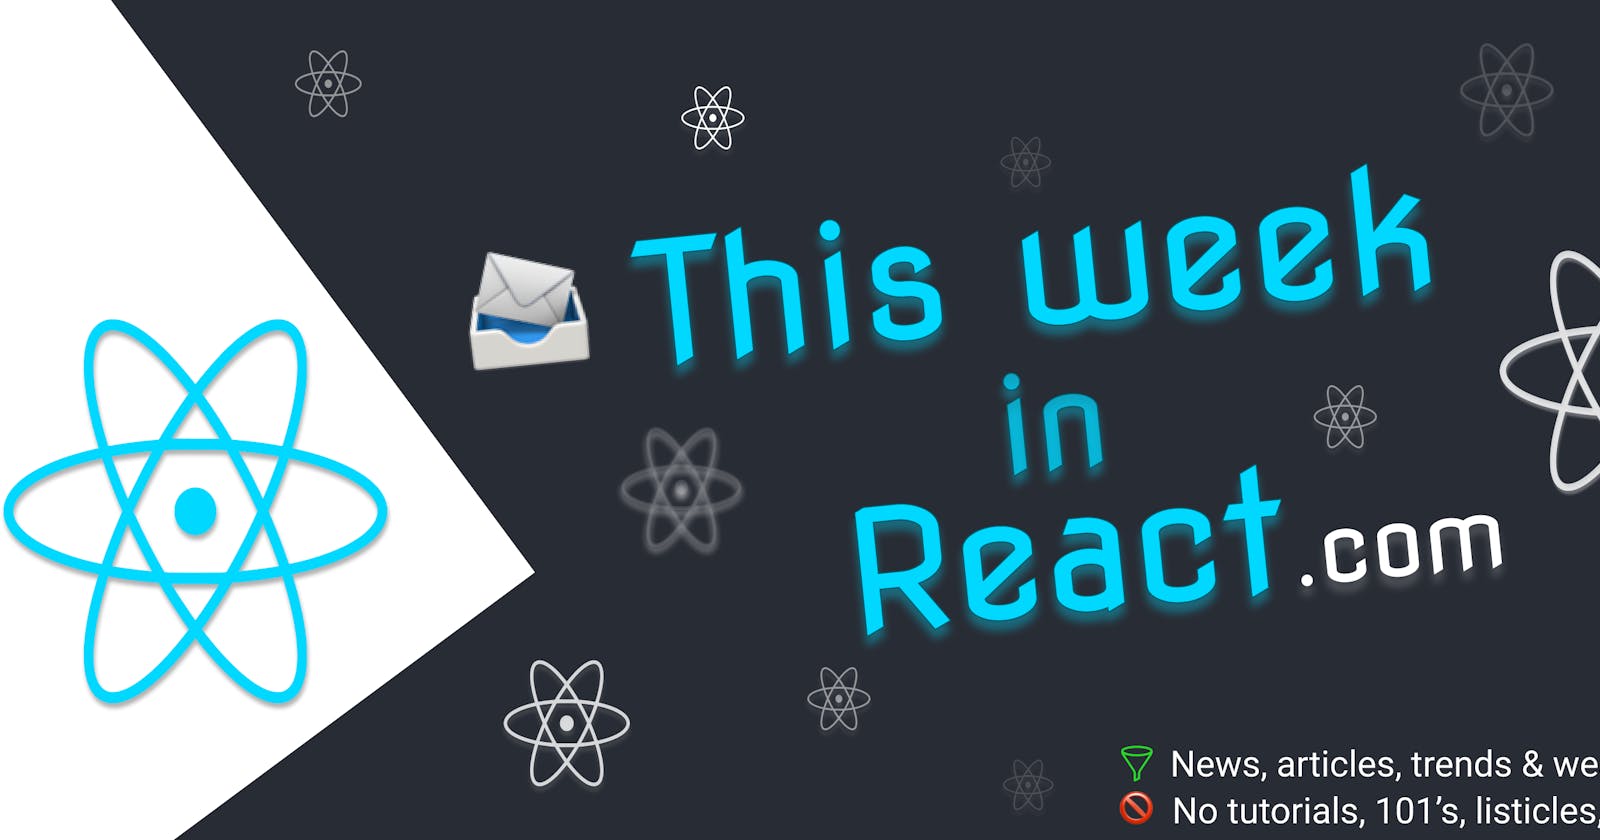 This Week In React #125: tRPC, T3, Remix, Zustand, Server Components, Drag & Drop, Forms, Gatsby, Remotion, RN, Skia...